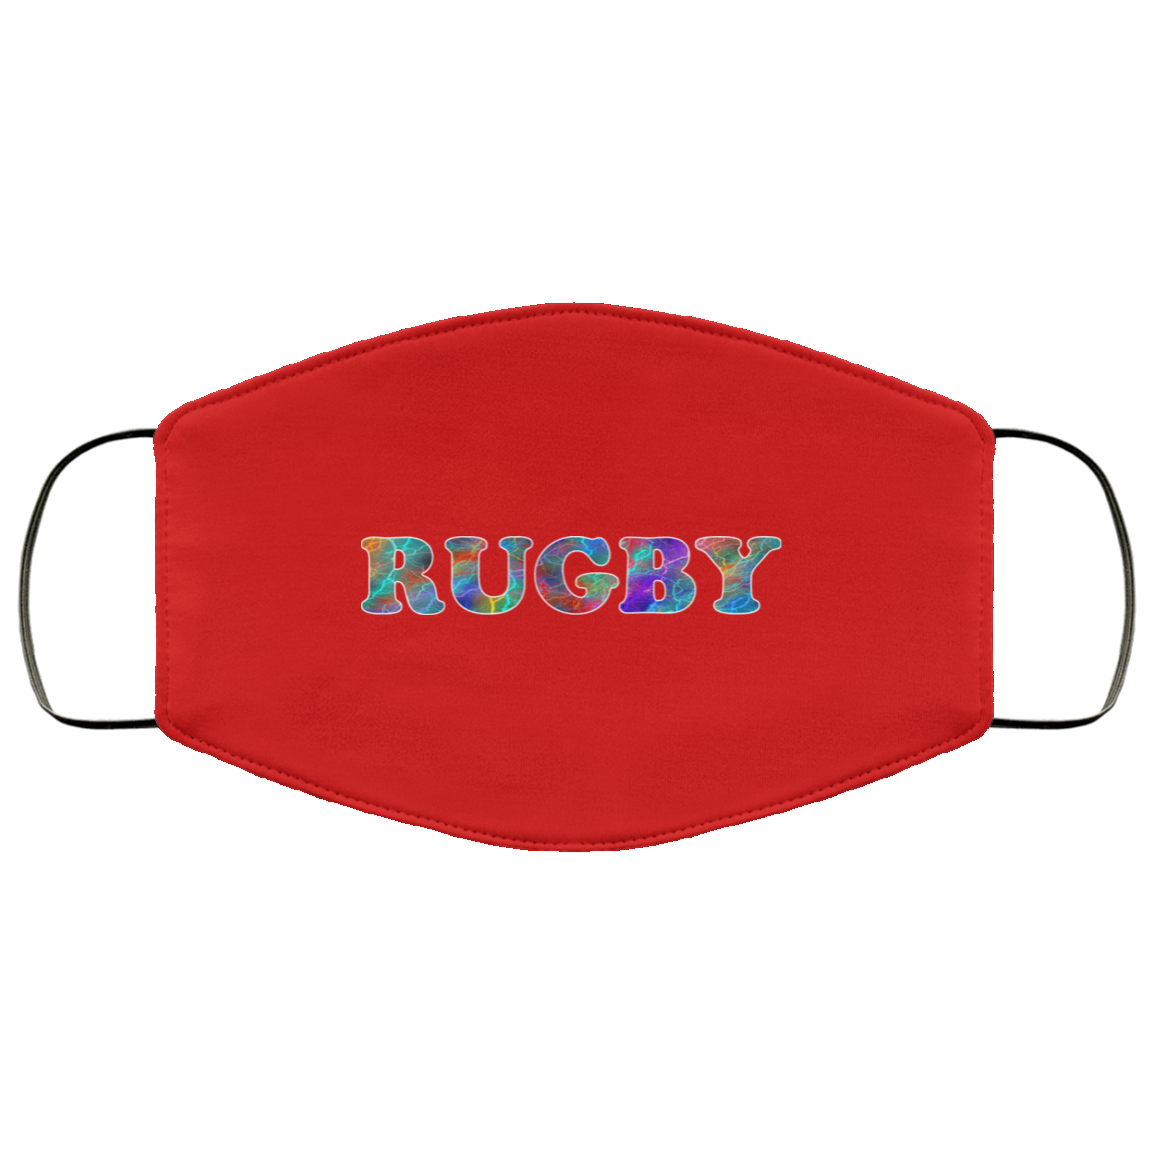 Rugby 2 Layer Protective Mask